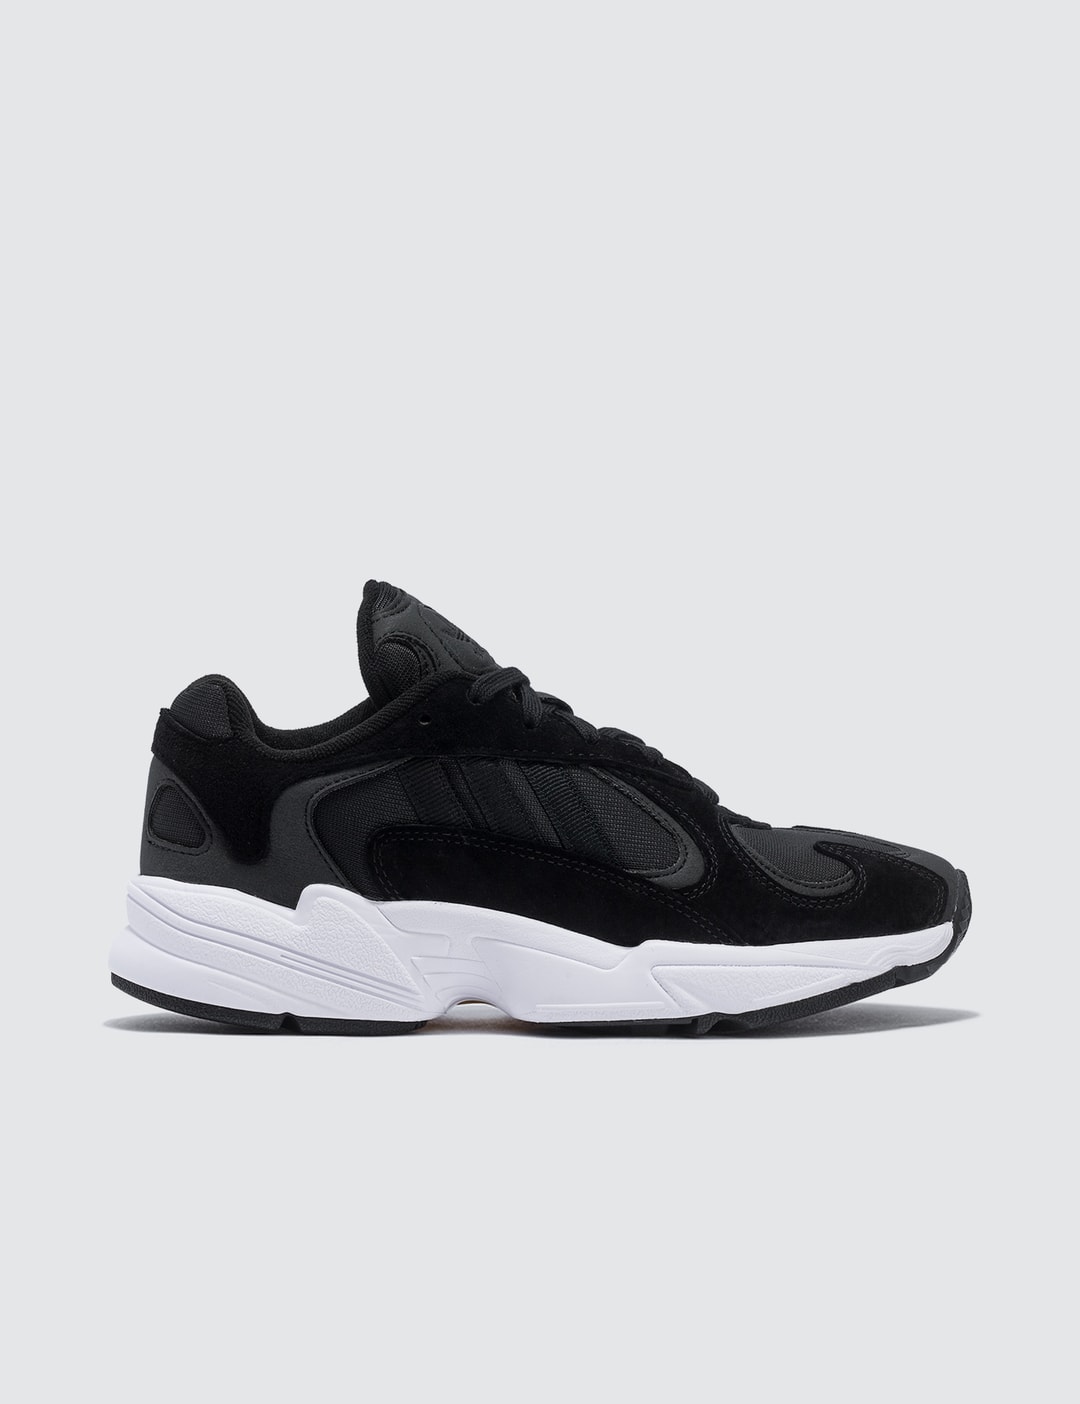 Adidas Originals Yung-1 | HBX - Globally Curated Fashion and Lifestyle by Hypebeast